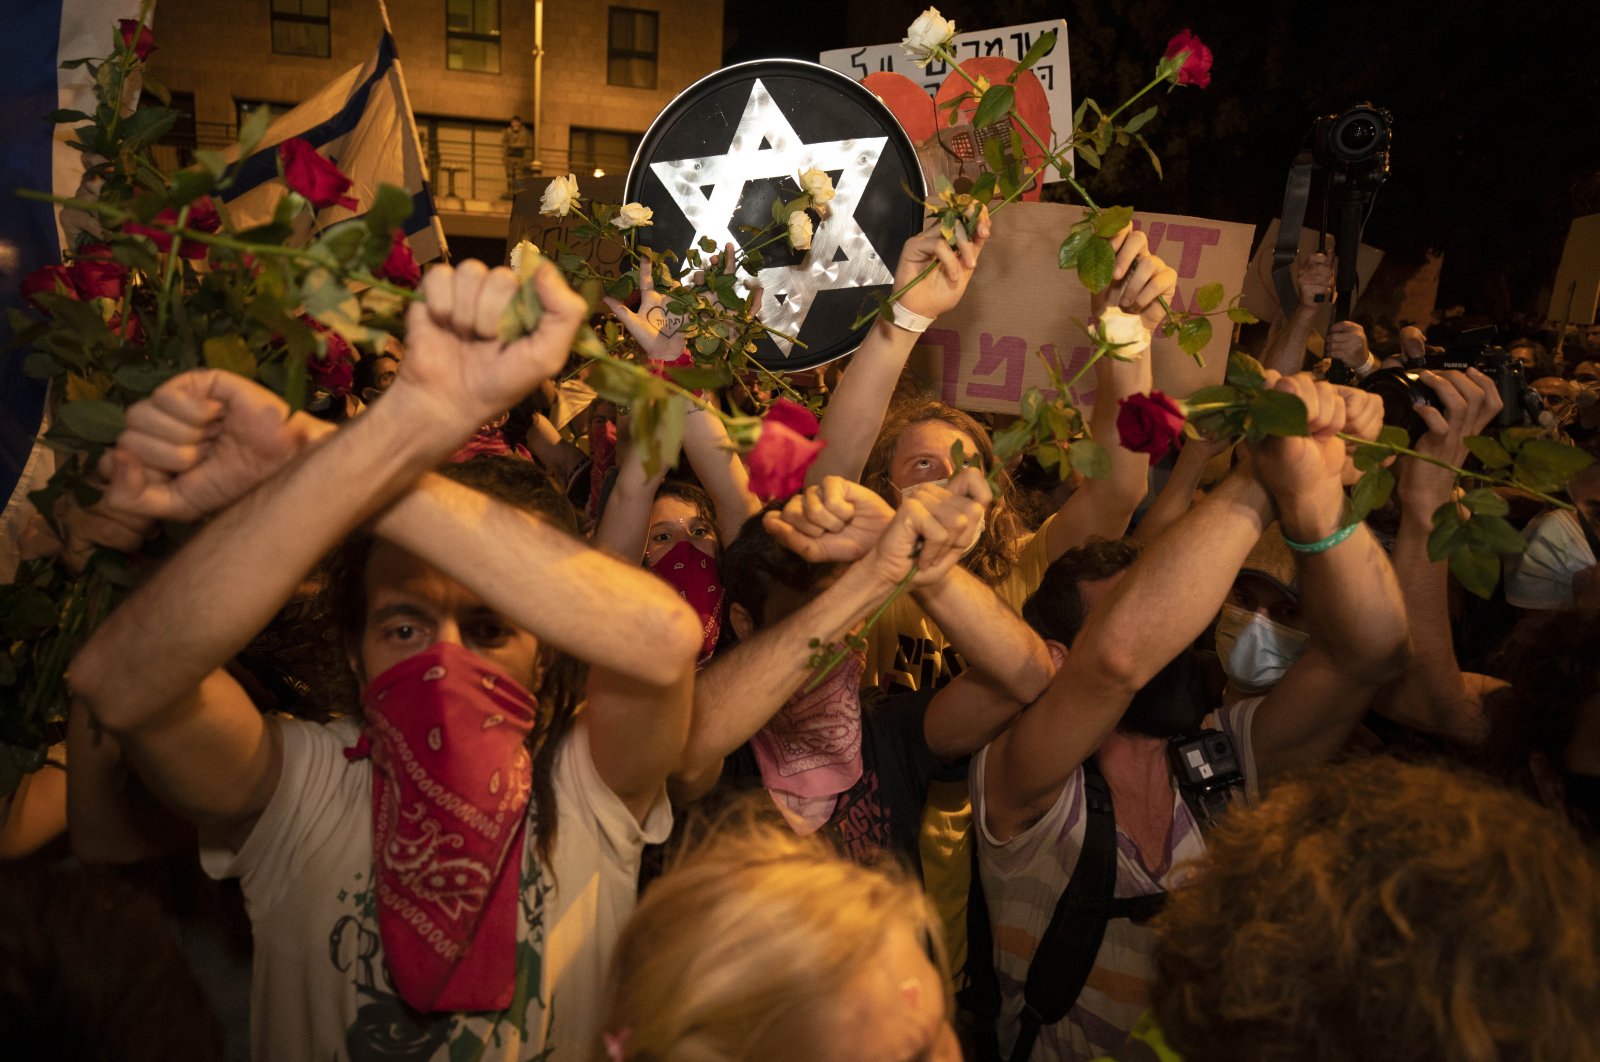 Israeli protesters hold flowers and chant slogans during a demonstration against Israeli Prime Minister Benjamin Netanyahu near the prime minister's residence in Jerusalem, Aug. 15, 2020. (AP Photo)